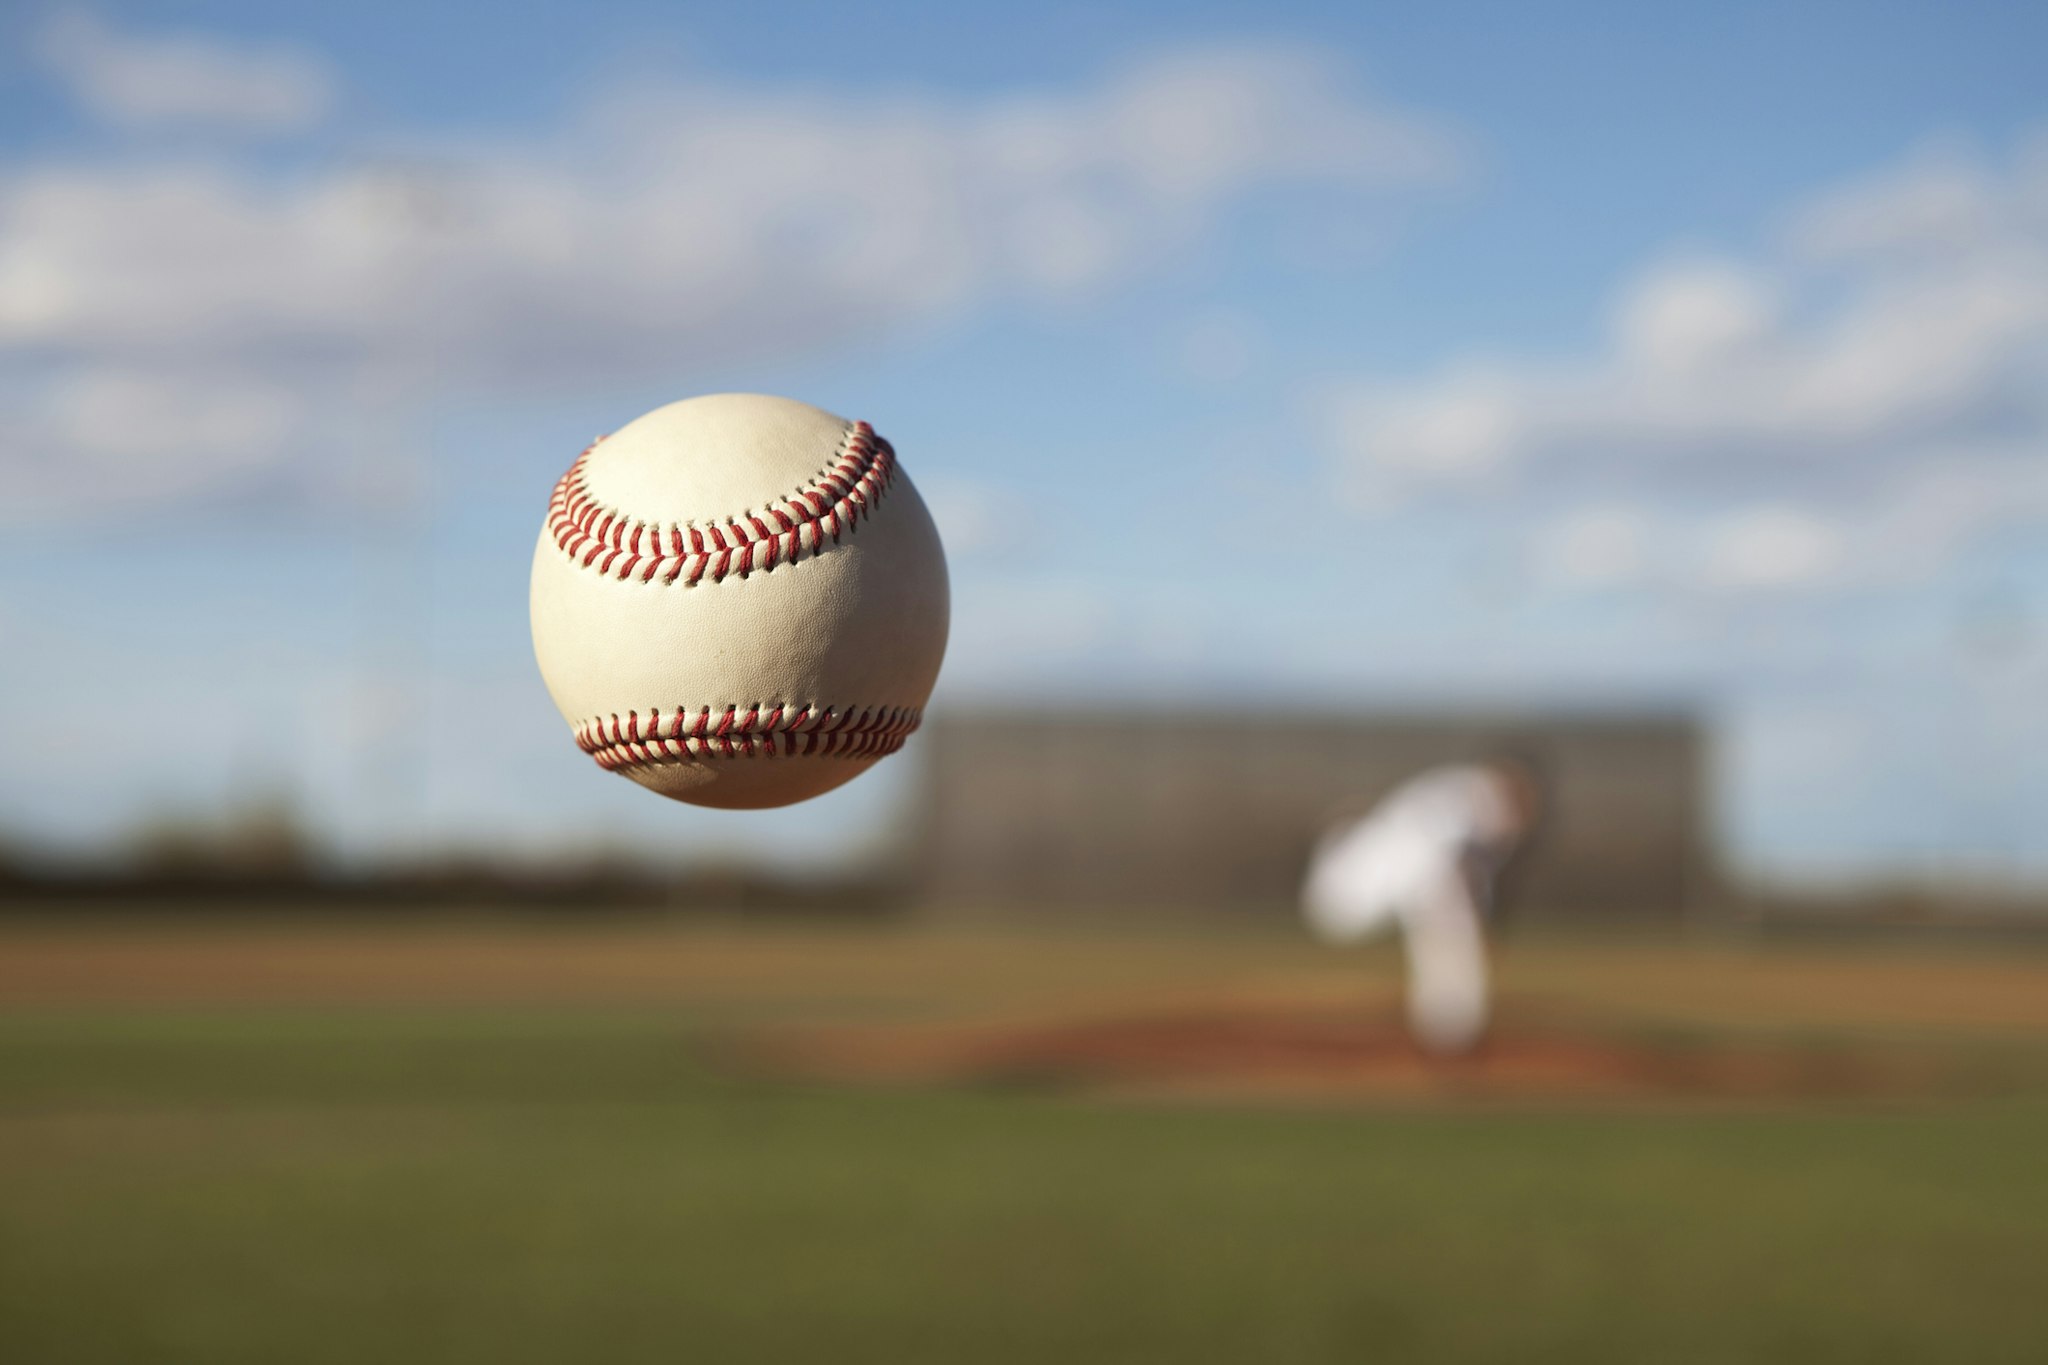 The dancing knuckleball pitch slowly approaches the plate in the summer sport of Baseball.